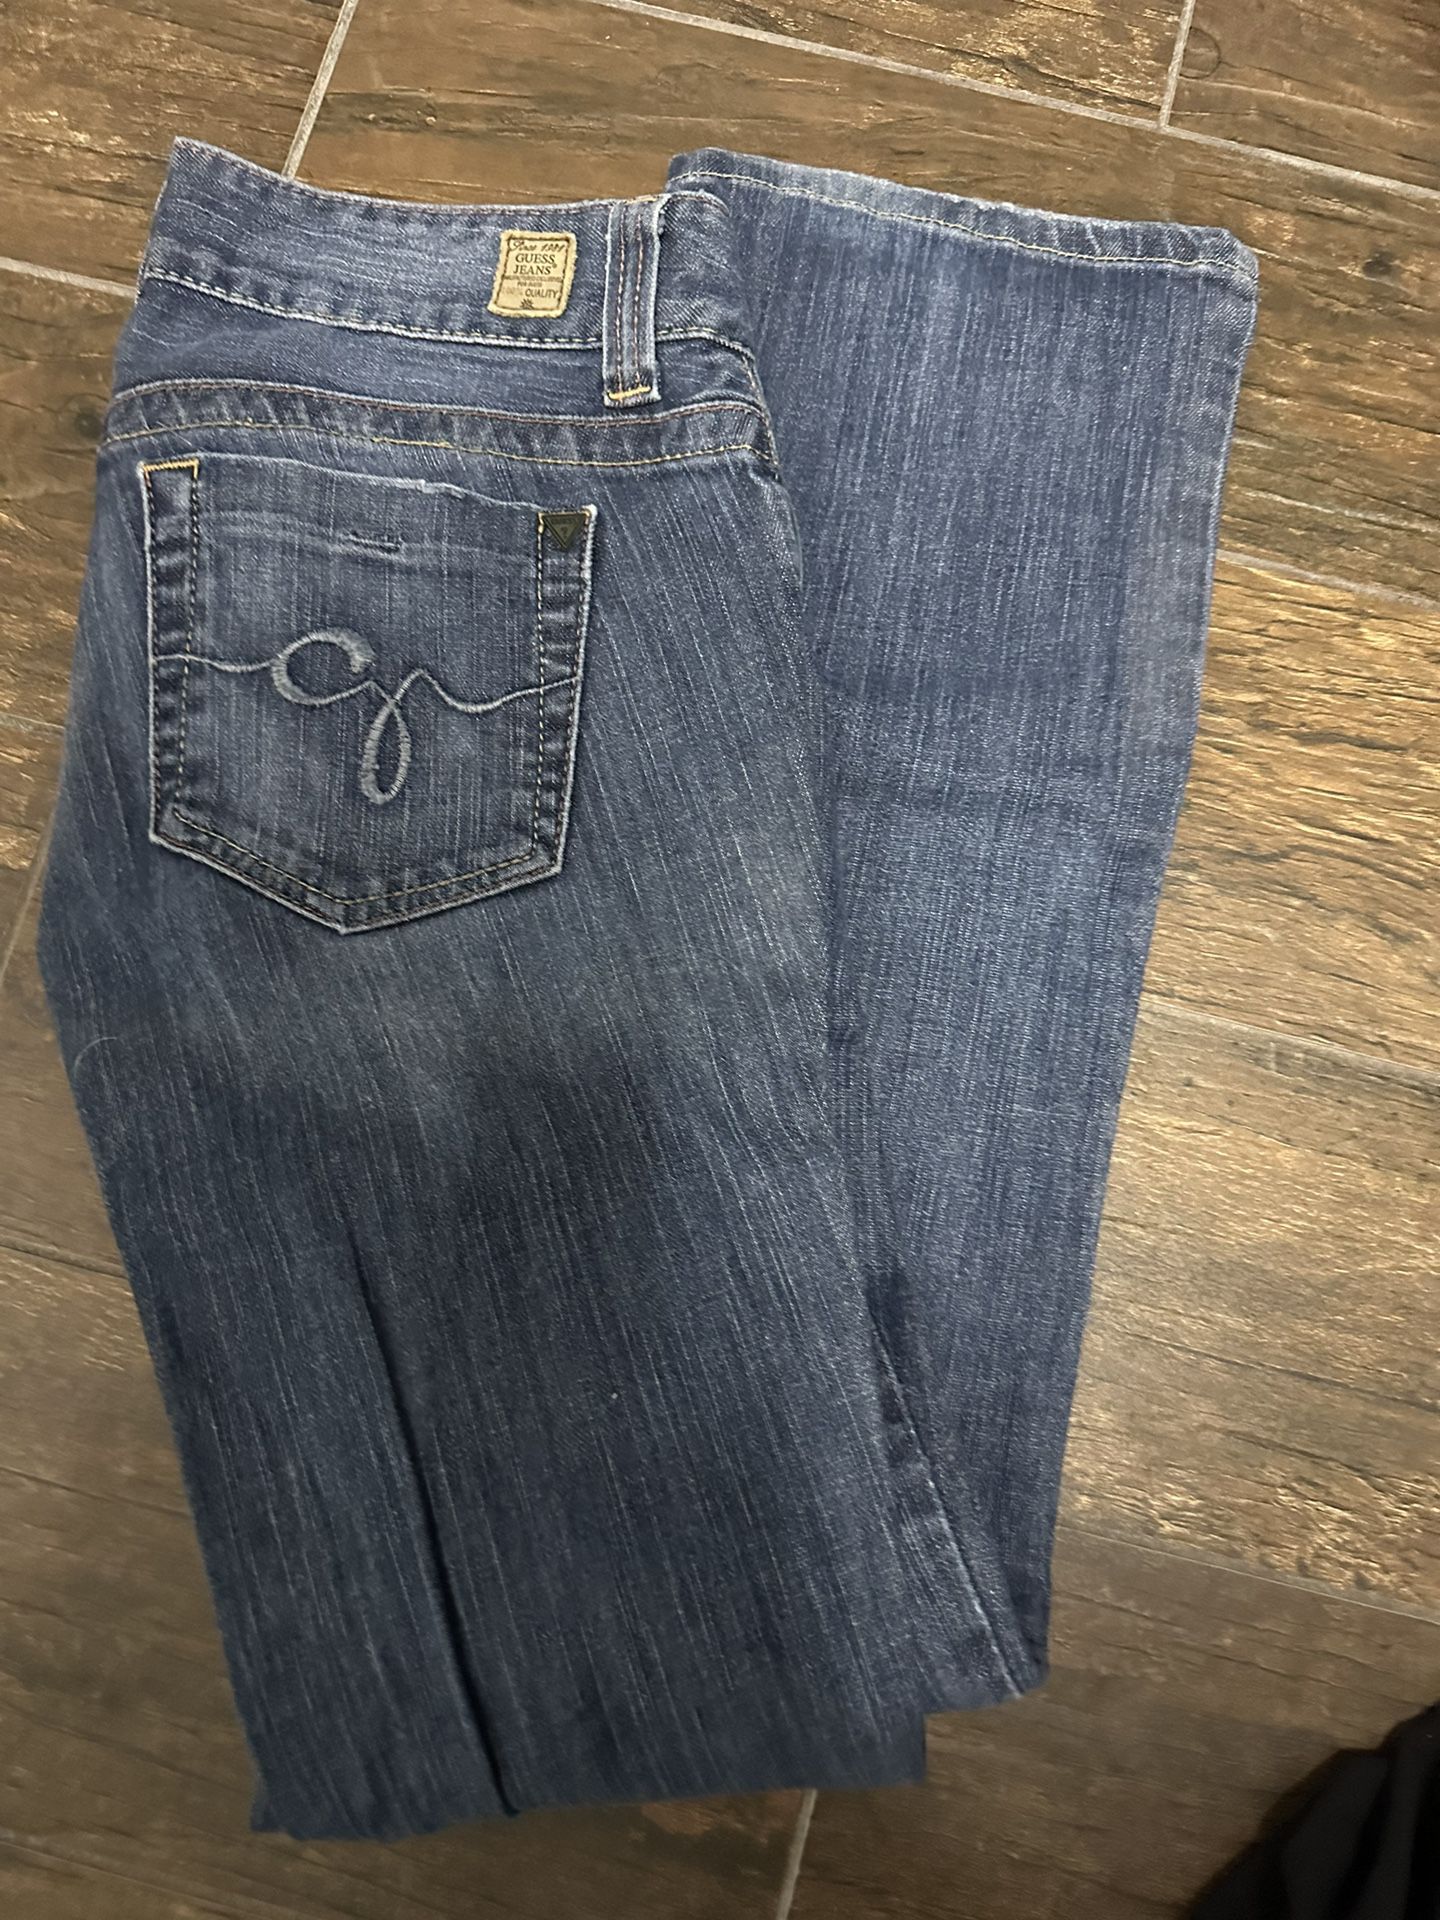 Women’s Guess jeans